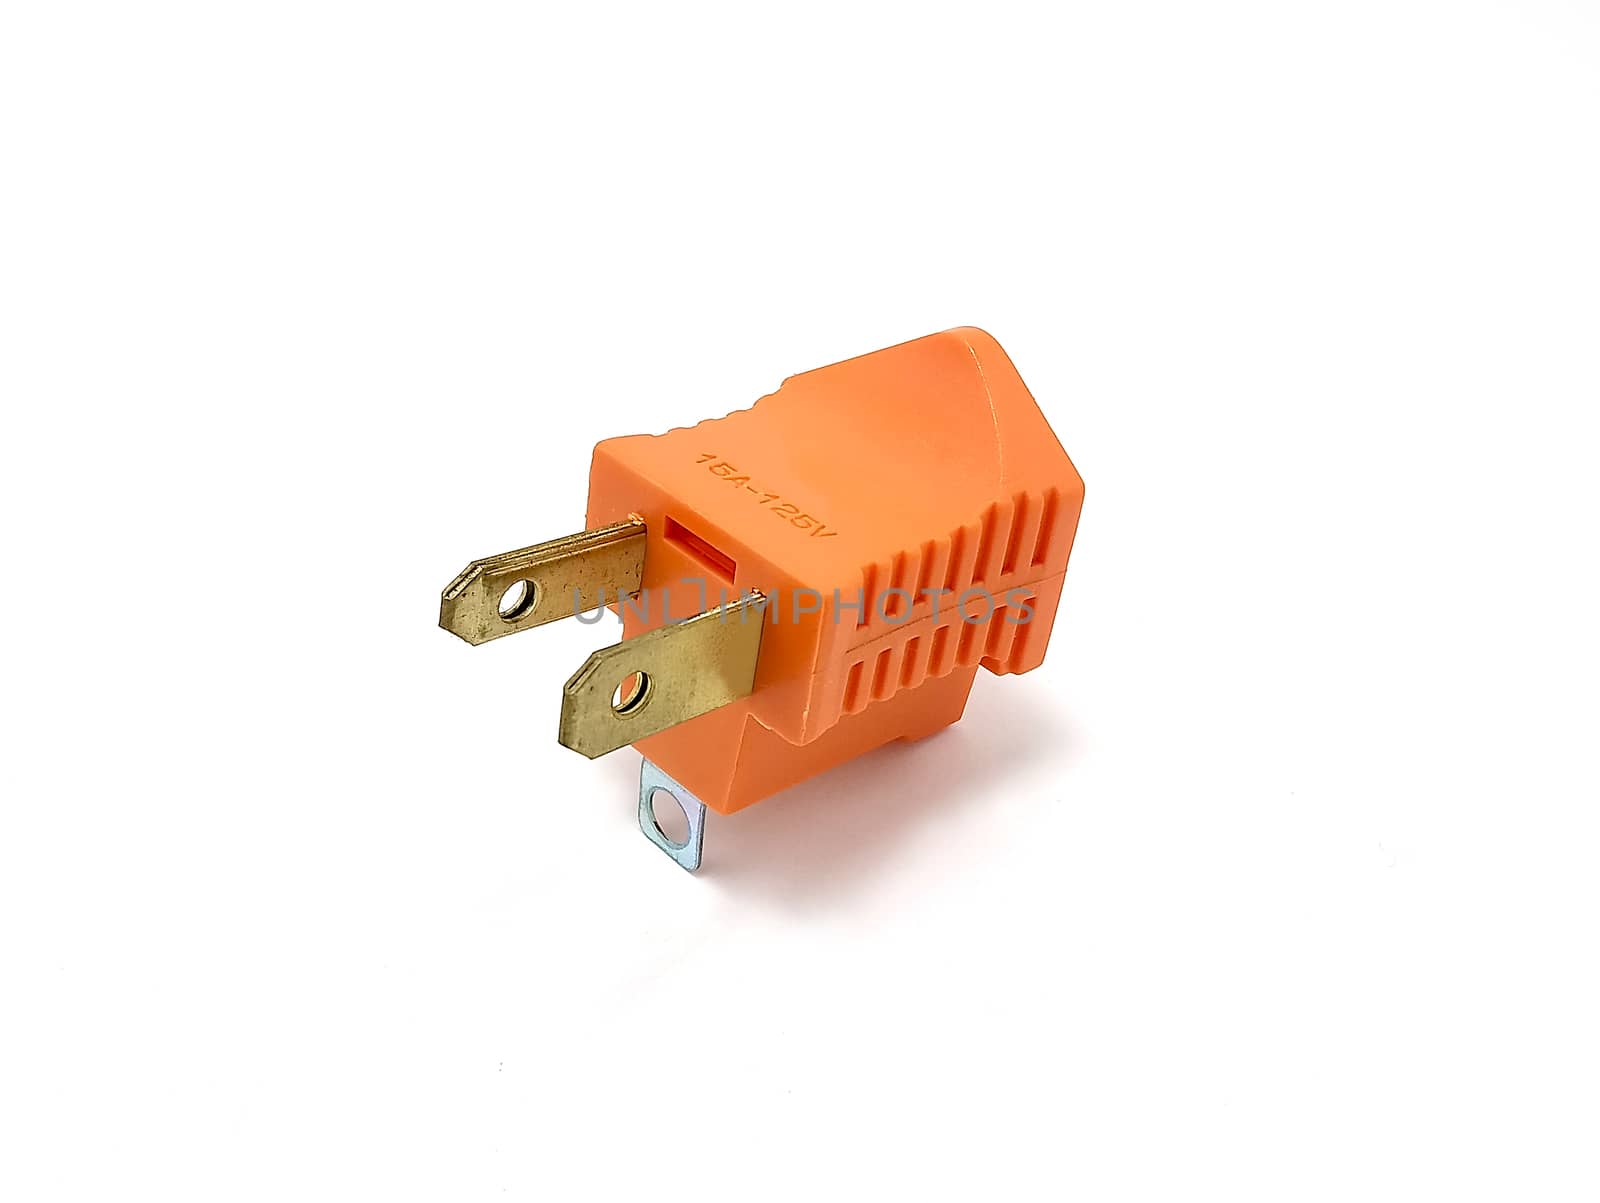 Orange two prong electrical plug by imwaltersy